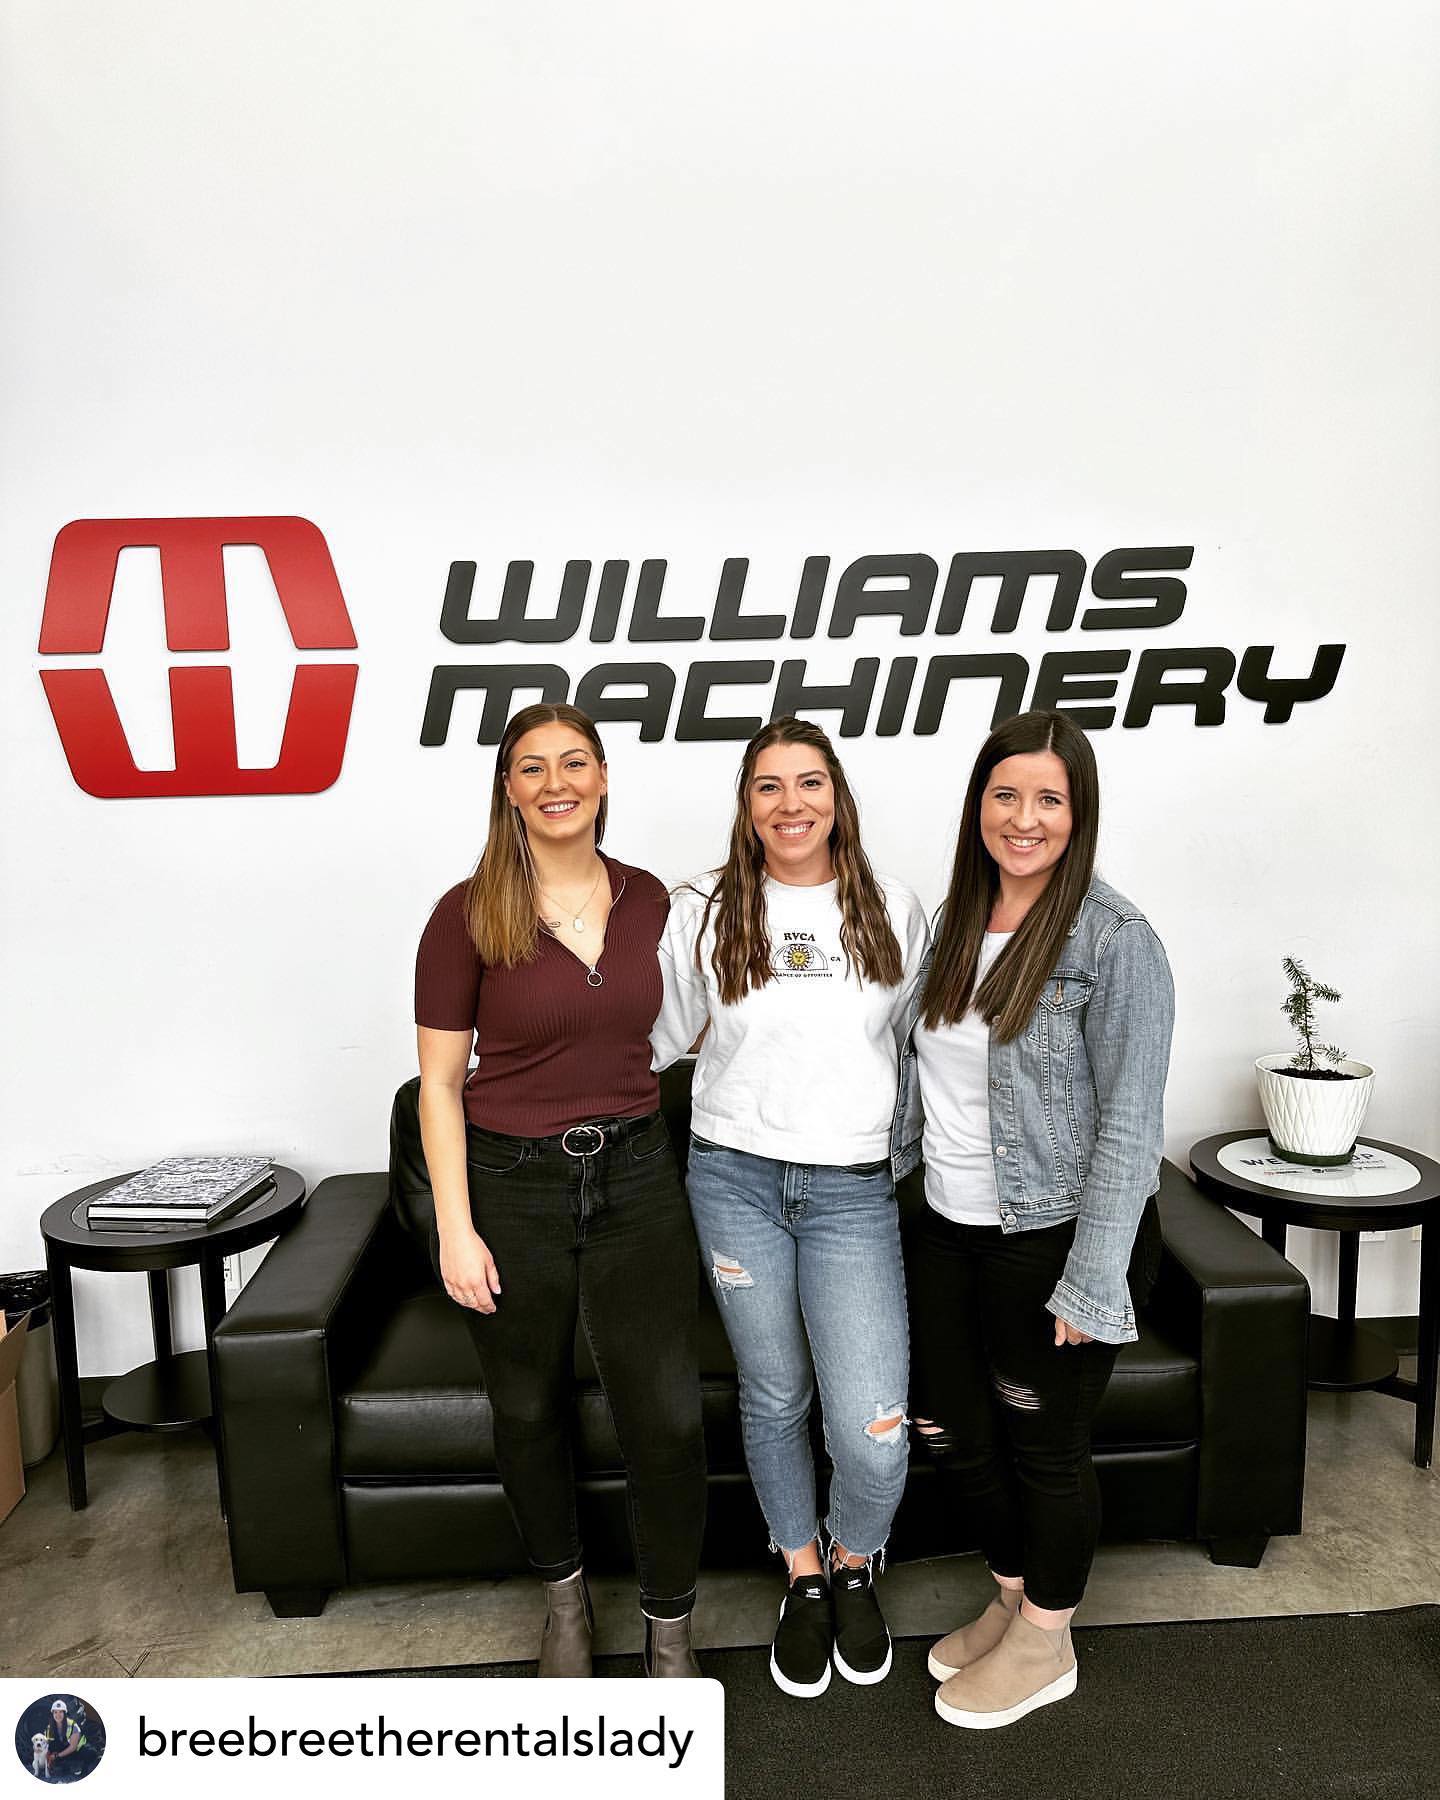 Happy International Women’s Day! Grateful to have these incredible women as part of our sales team 😊

#repost @breebreetherentalslady 

Breanna (center) has been with Wesgroup for 2.5 years. She started in Used Equipment Sales and moved to her current Rentals Account Manager position. 
Taylor (on the right) has been with Williams Machinery for just over a year and is our Inside Sales Material Handling Rep. 
Karlie (on the left) started with Williams Machinery in January and is a Inside Equipment and Support Specialist. 
Milan (not pictured) started in January and is a Inside Equipment and Support Specialist as well.

#lifeatwesgroupequipment #wesgroupequipment #womeninconstruction #internationalwomensday